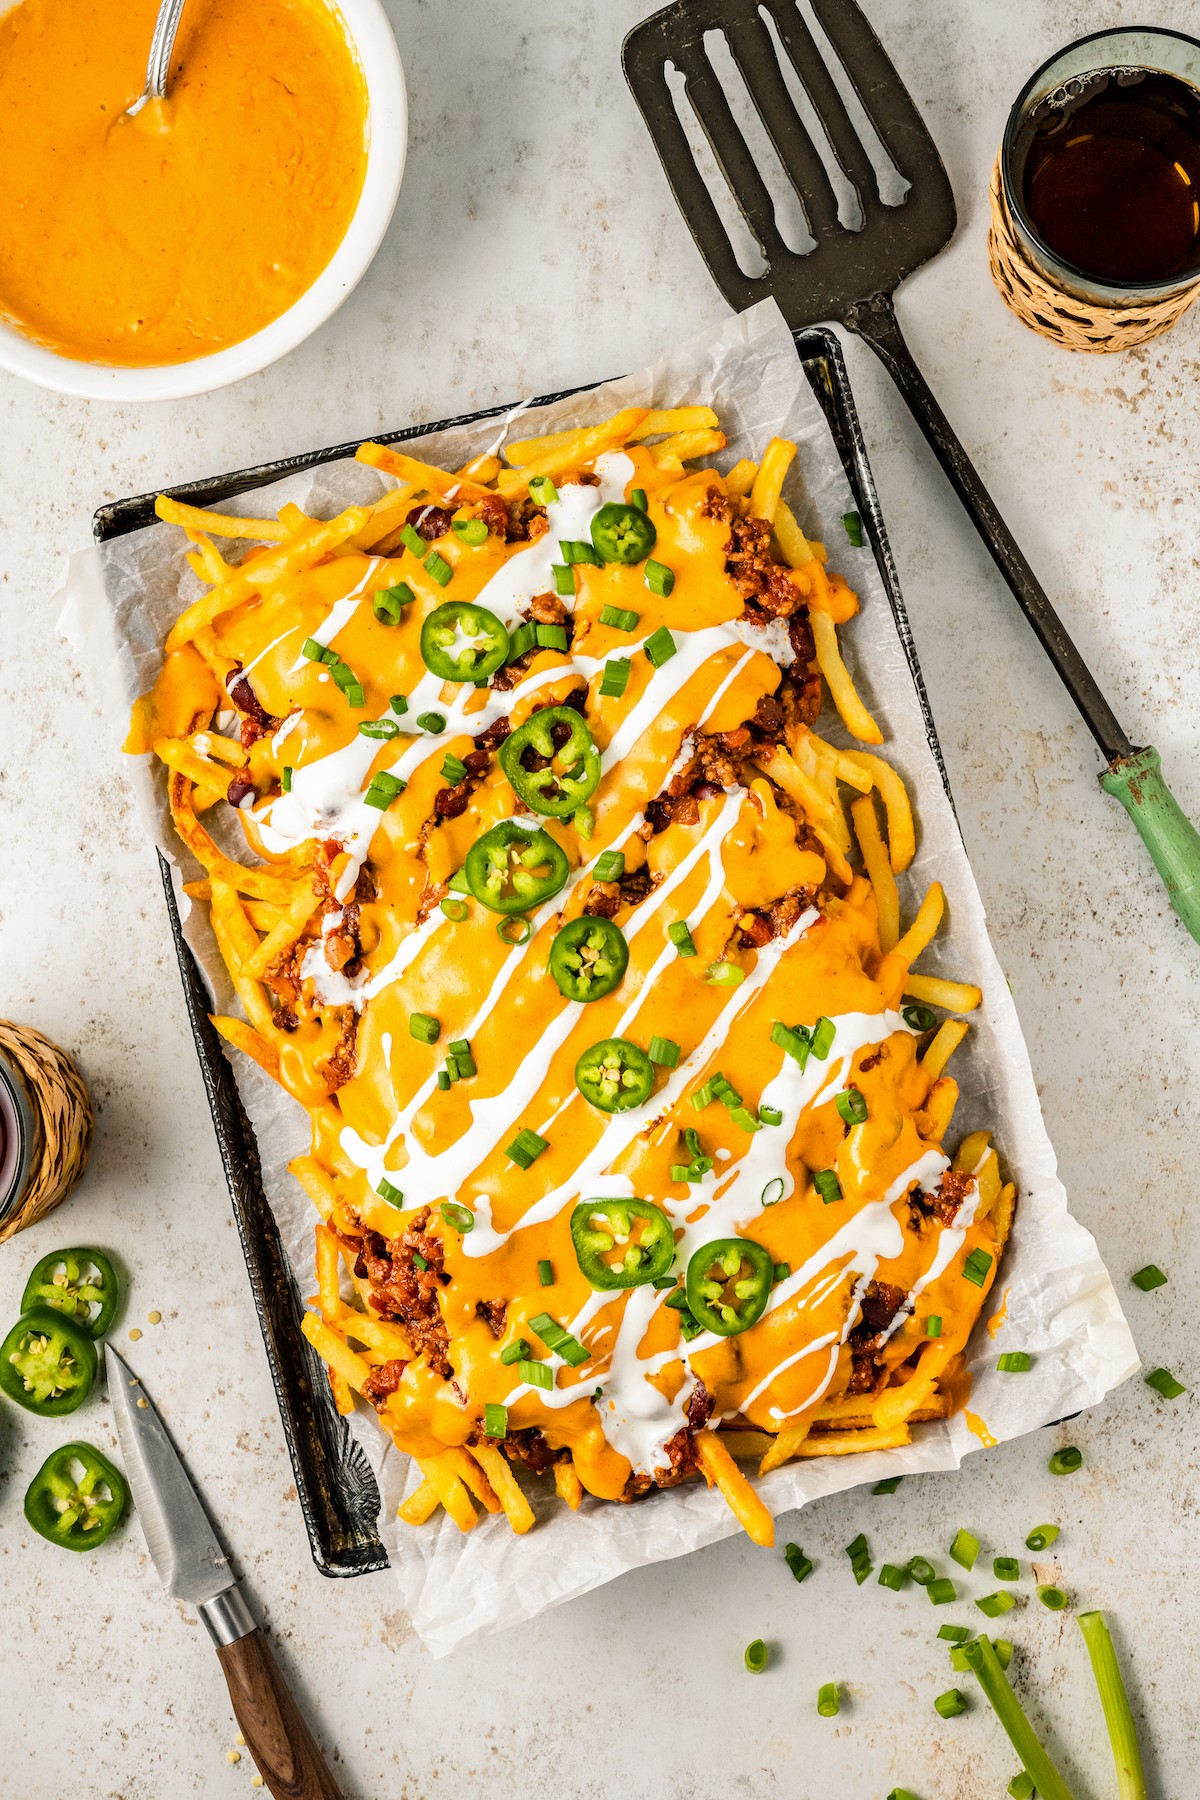 A sheet pan of fries topped with chili, cheese, sour cream, jalapeno, and green onion.